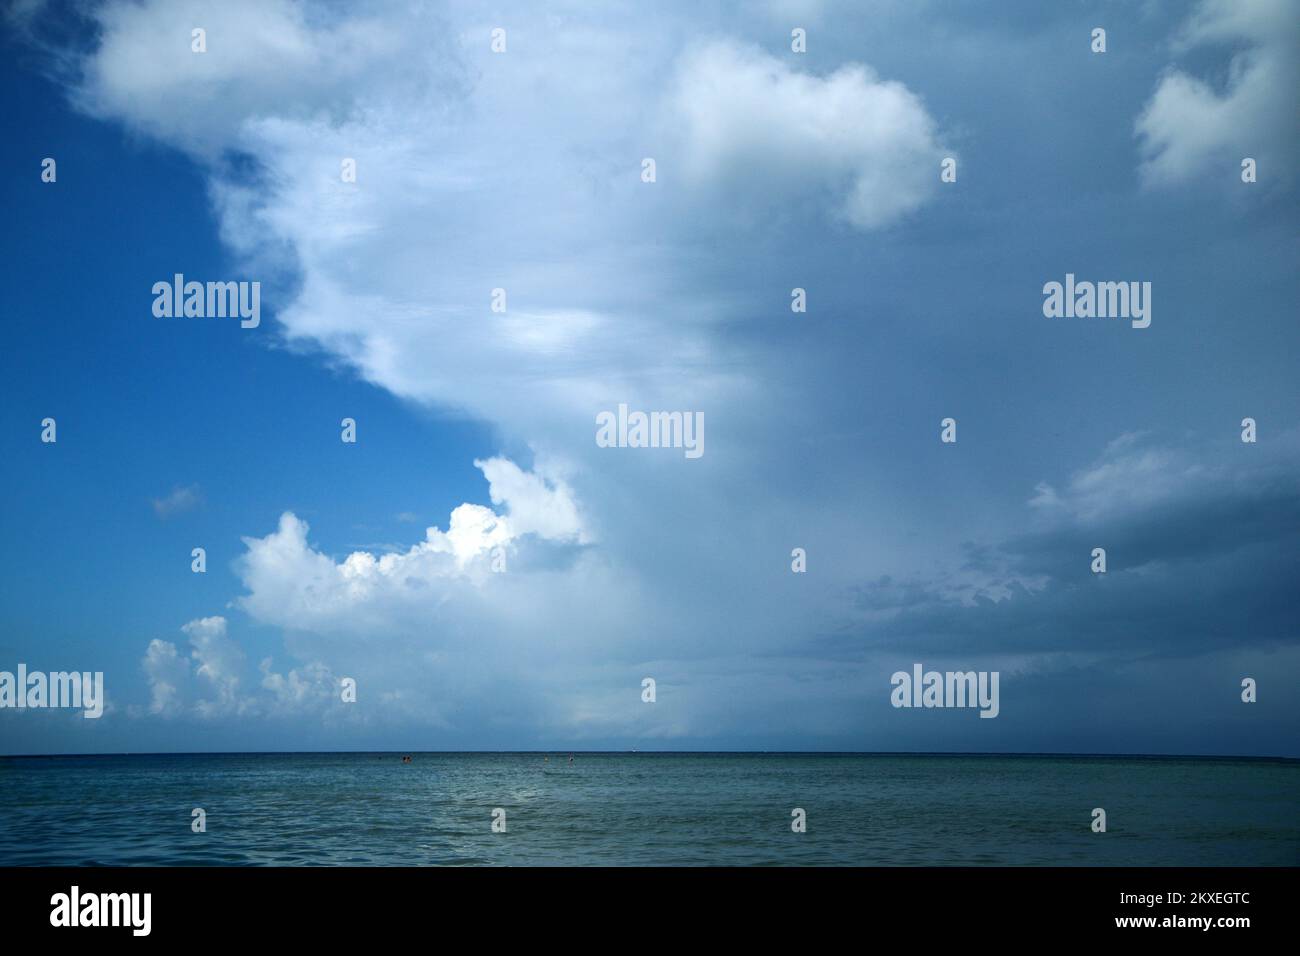 The detail of the front above the ocean surface with a dramatic change from sunny day to the rainy area. Stock Photo